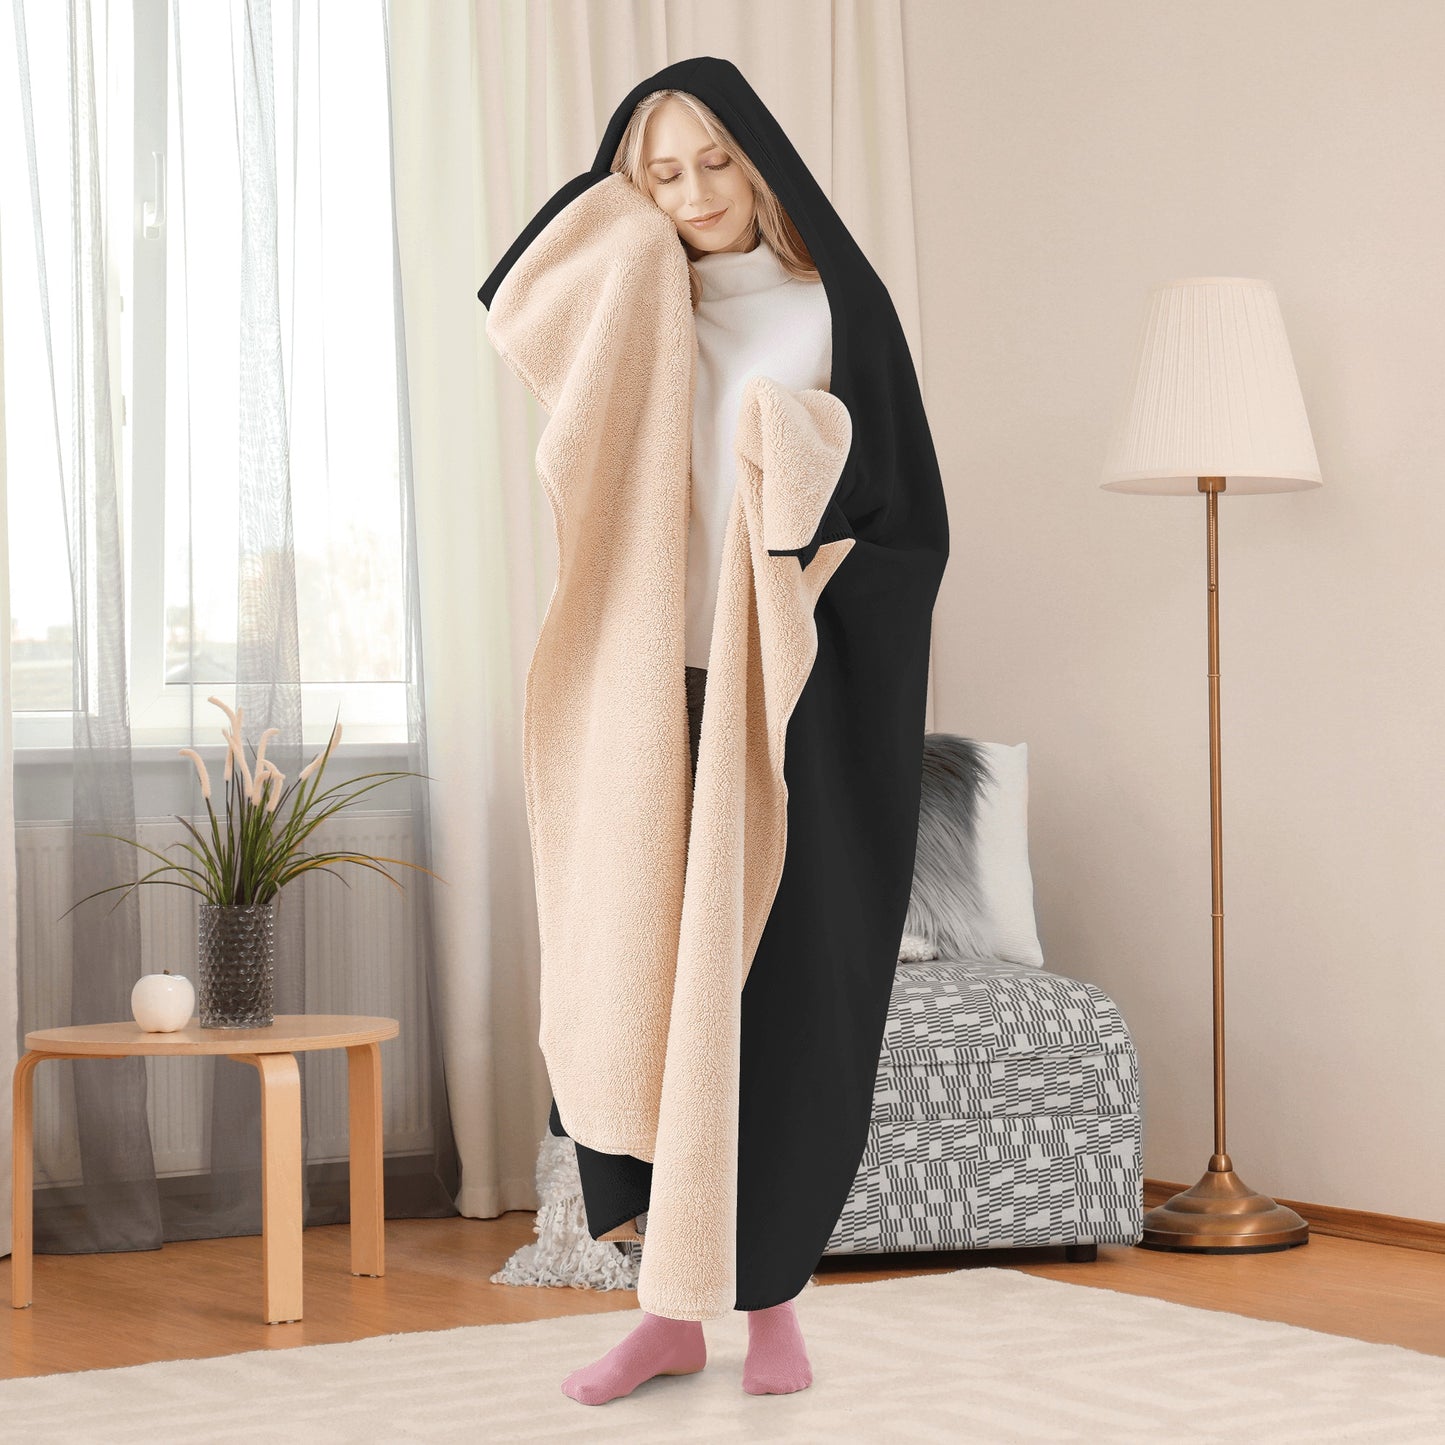 Winged Cross Hooded Blanket (FREE SHIPPING)